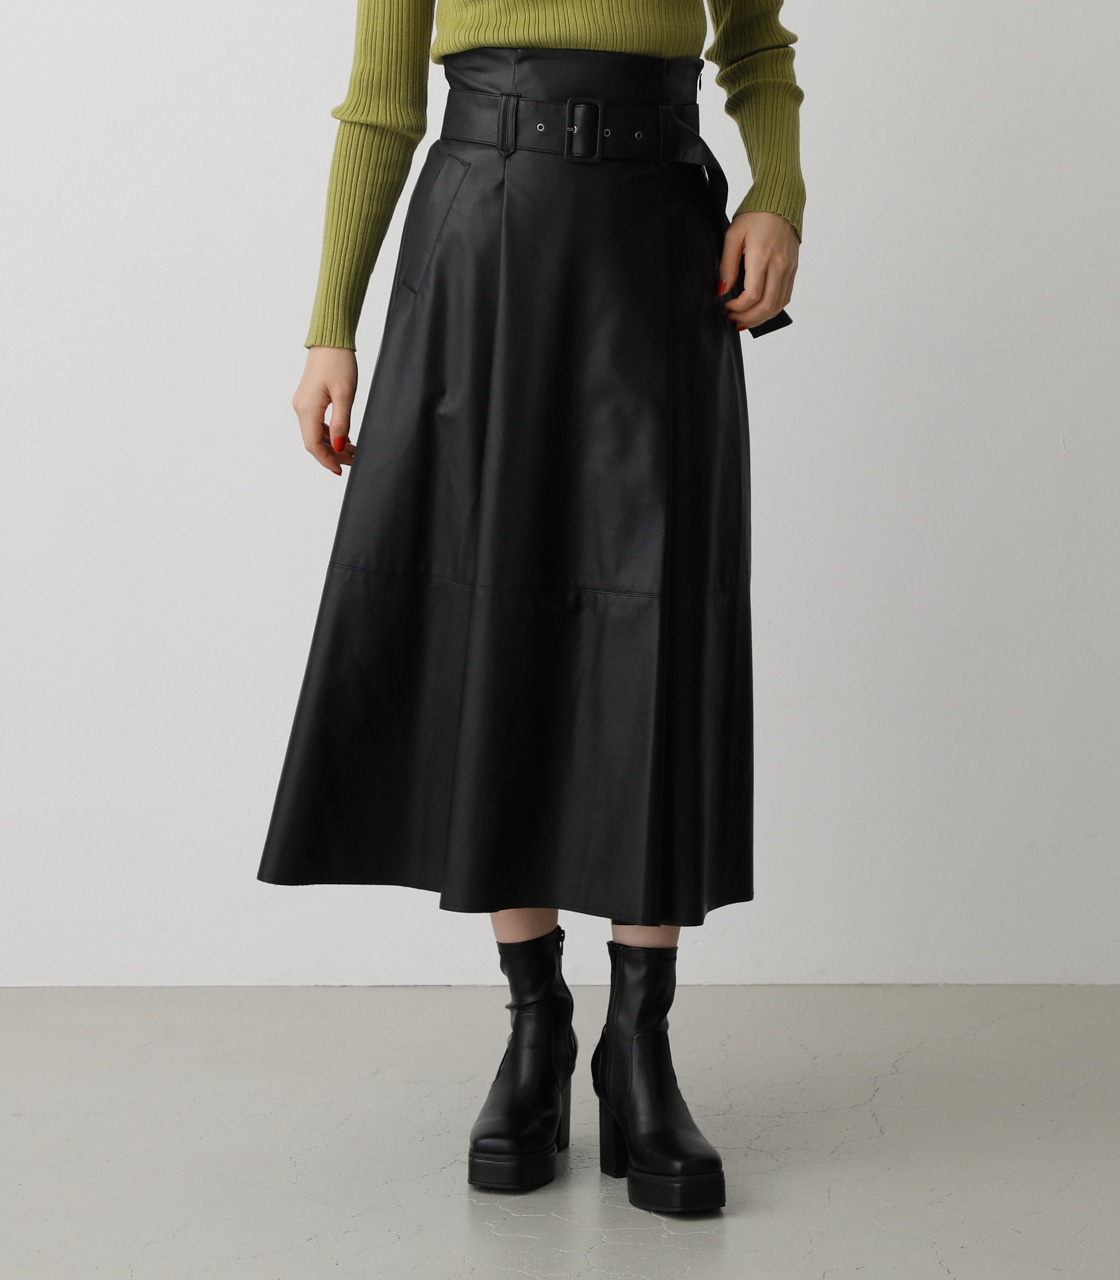 FAUX LEATHER HIGH WAIST SKIRT/フェイクレザーハイウエストスカート 詳細画像 BLK 1